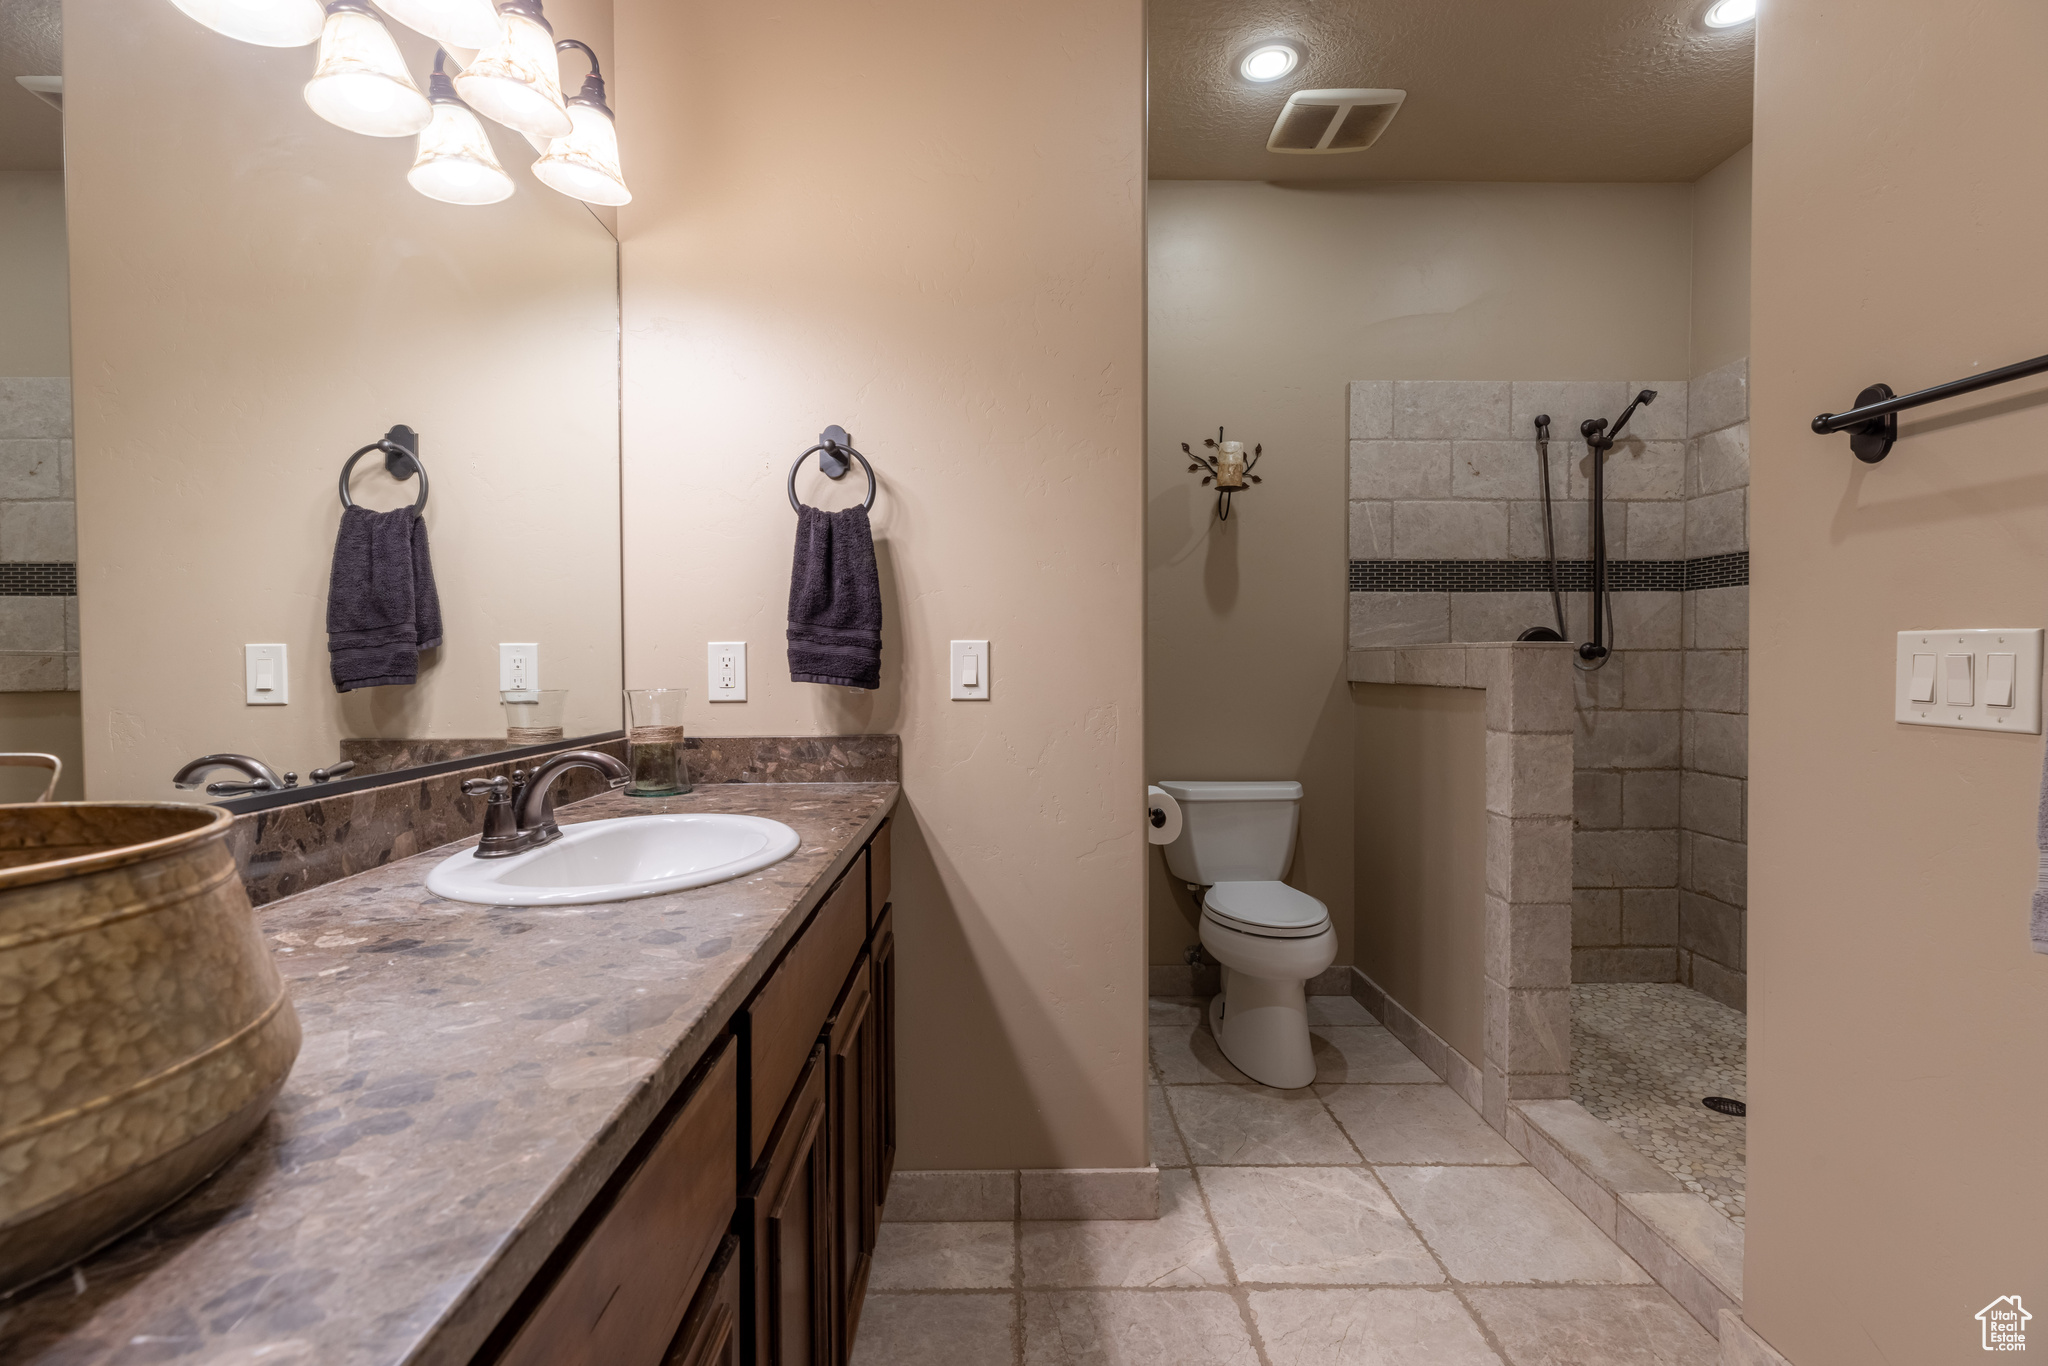 2nd Bathroom perspective featuring a tile floors, shower, stone vanity and tile floors